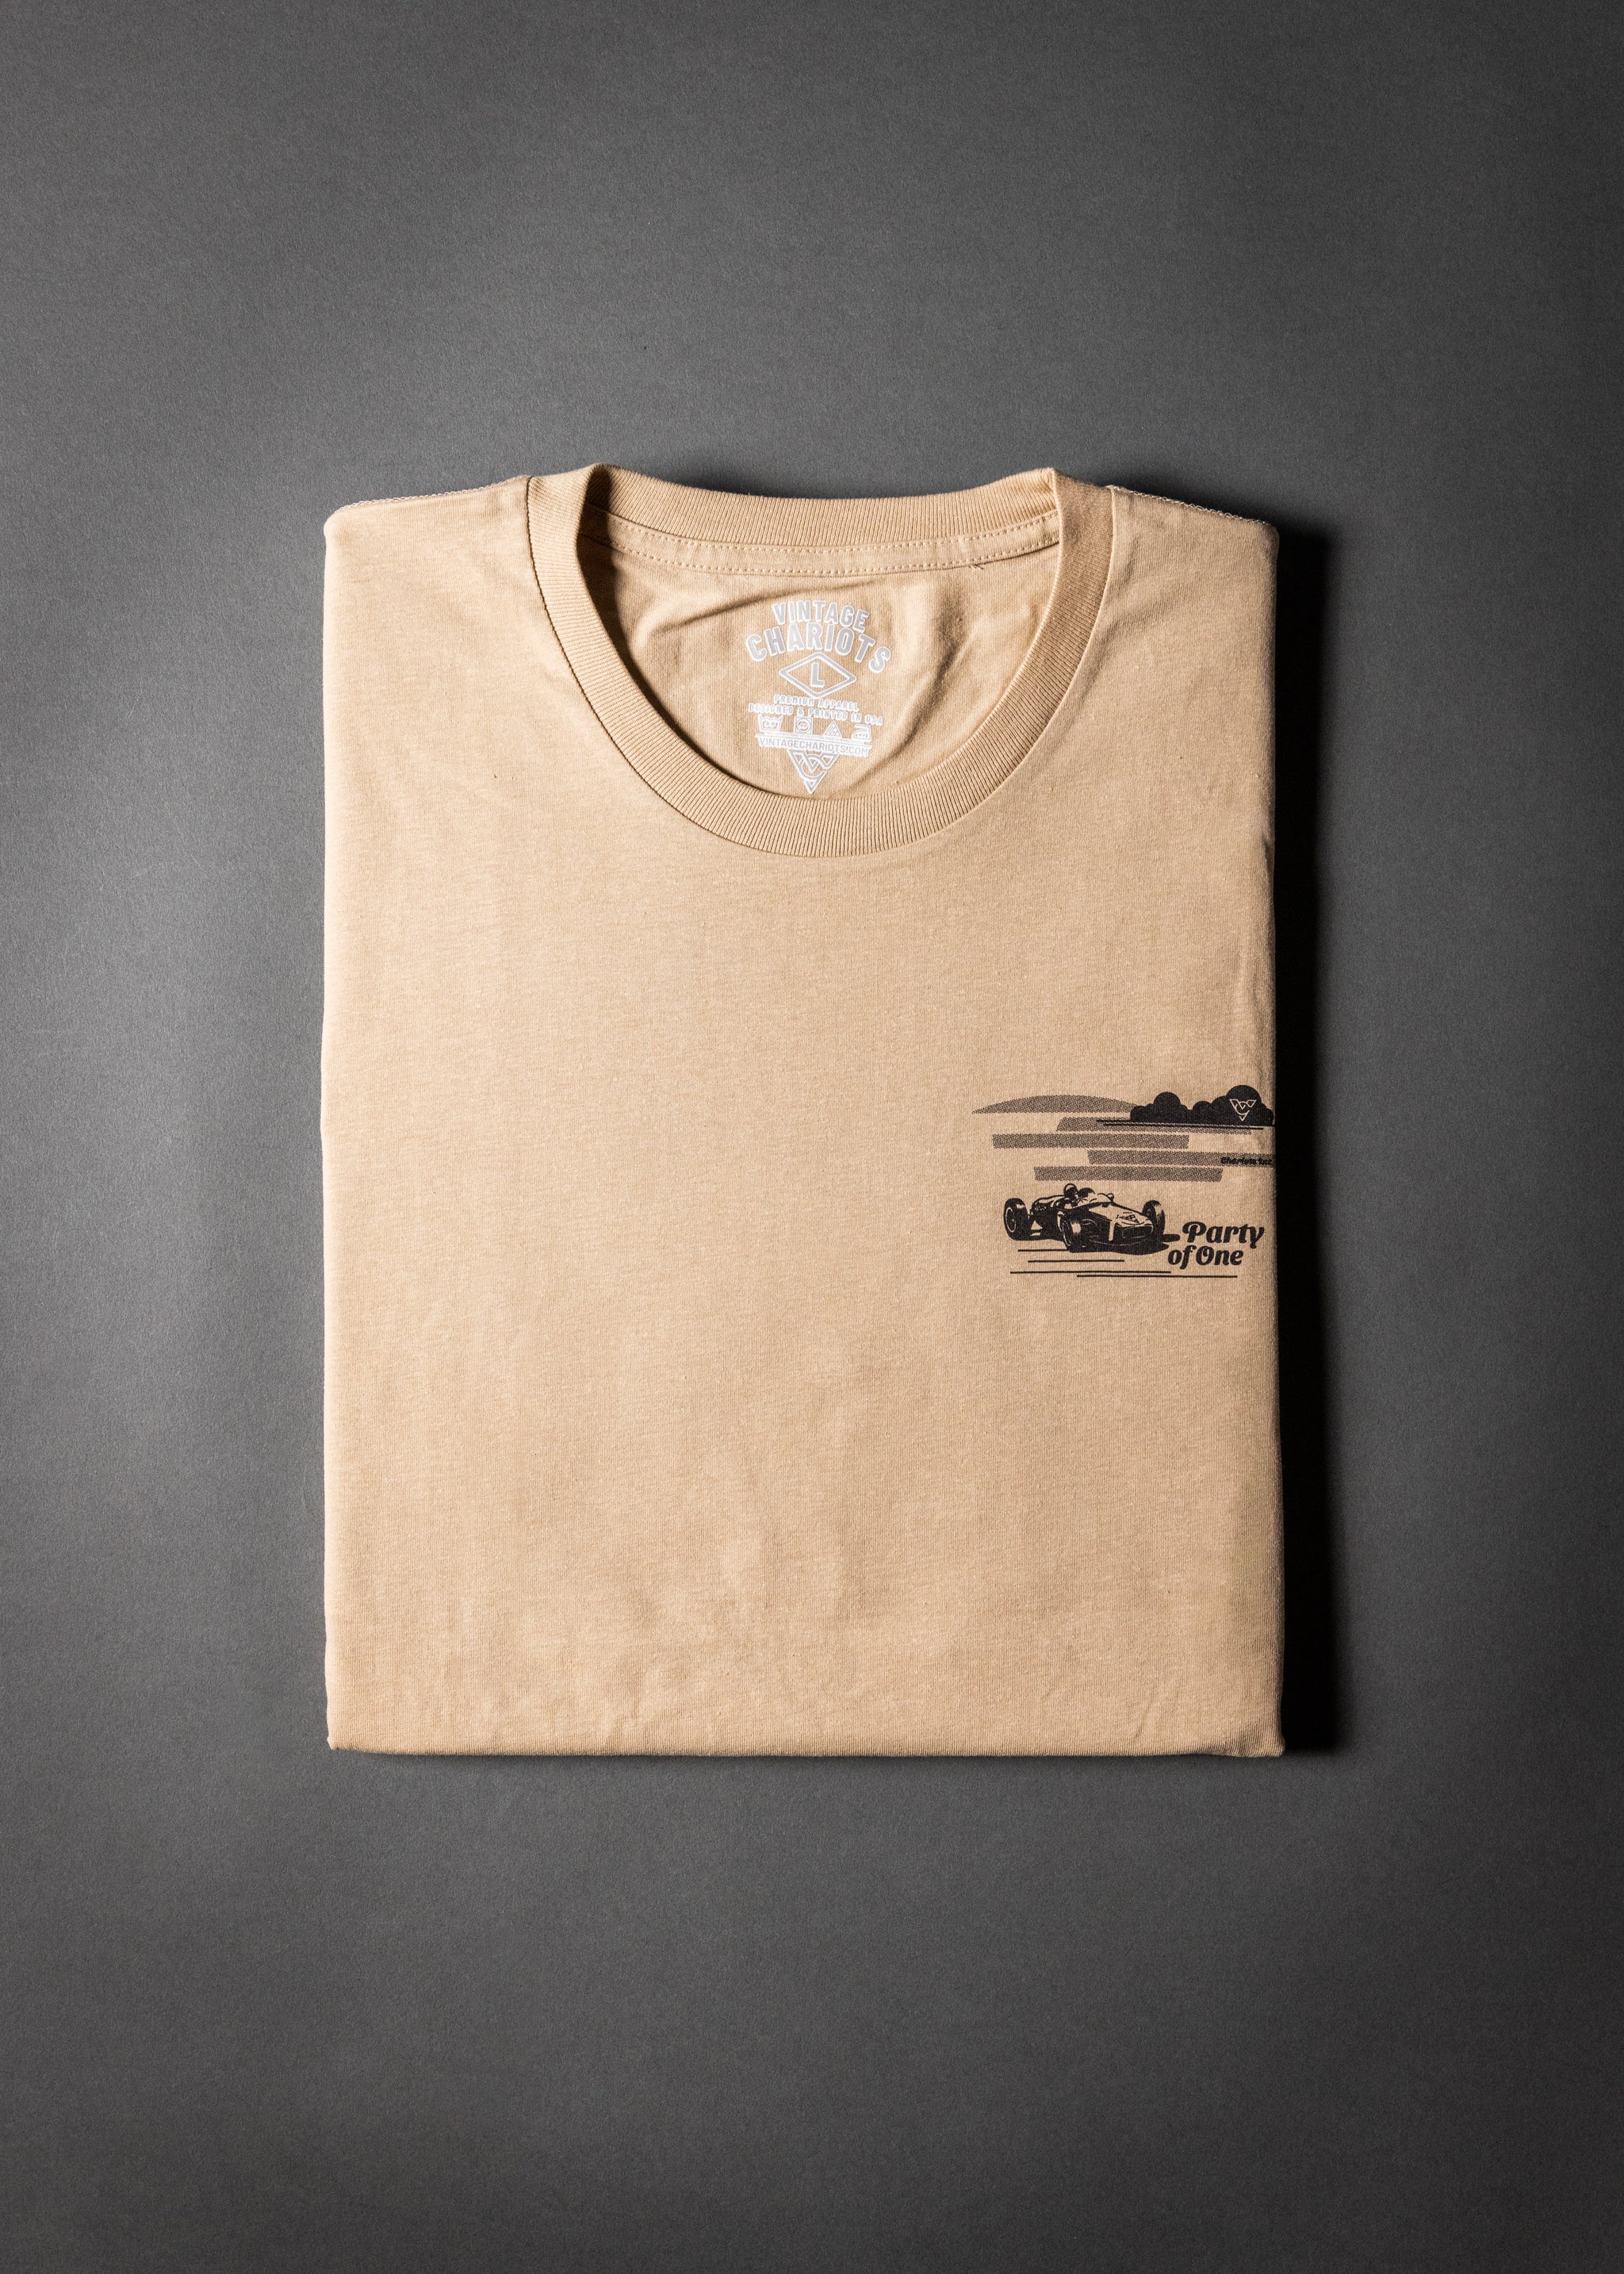 PARTY OF ONE TEE (Sand)